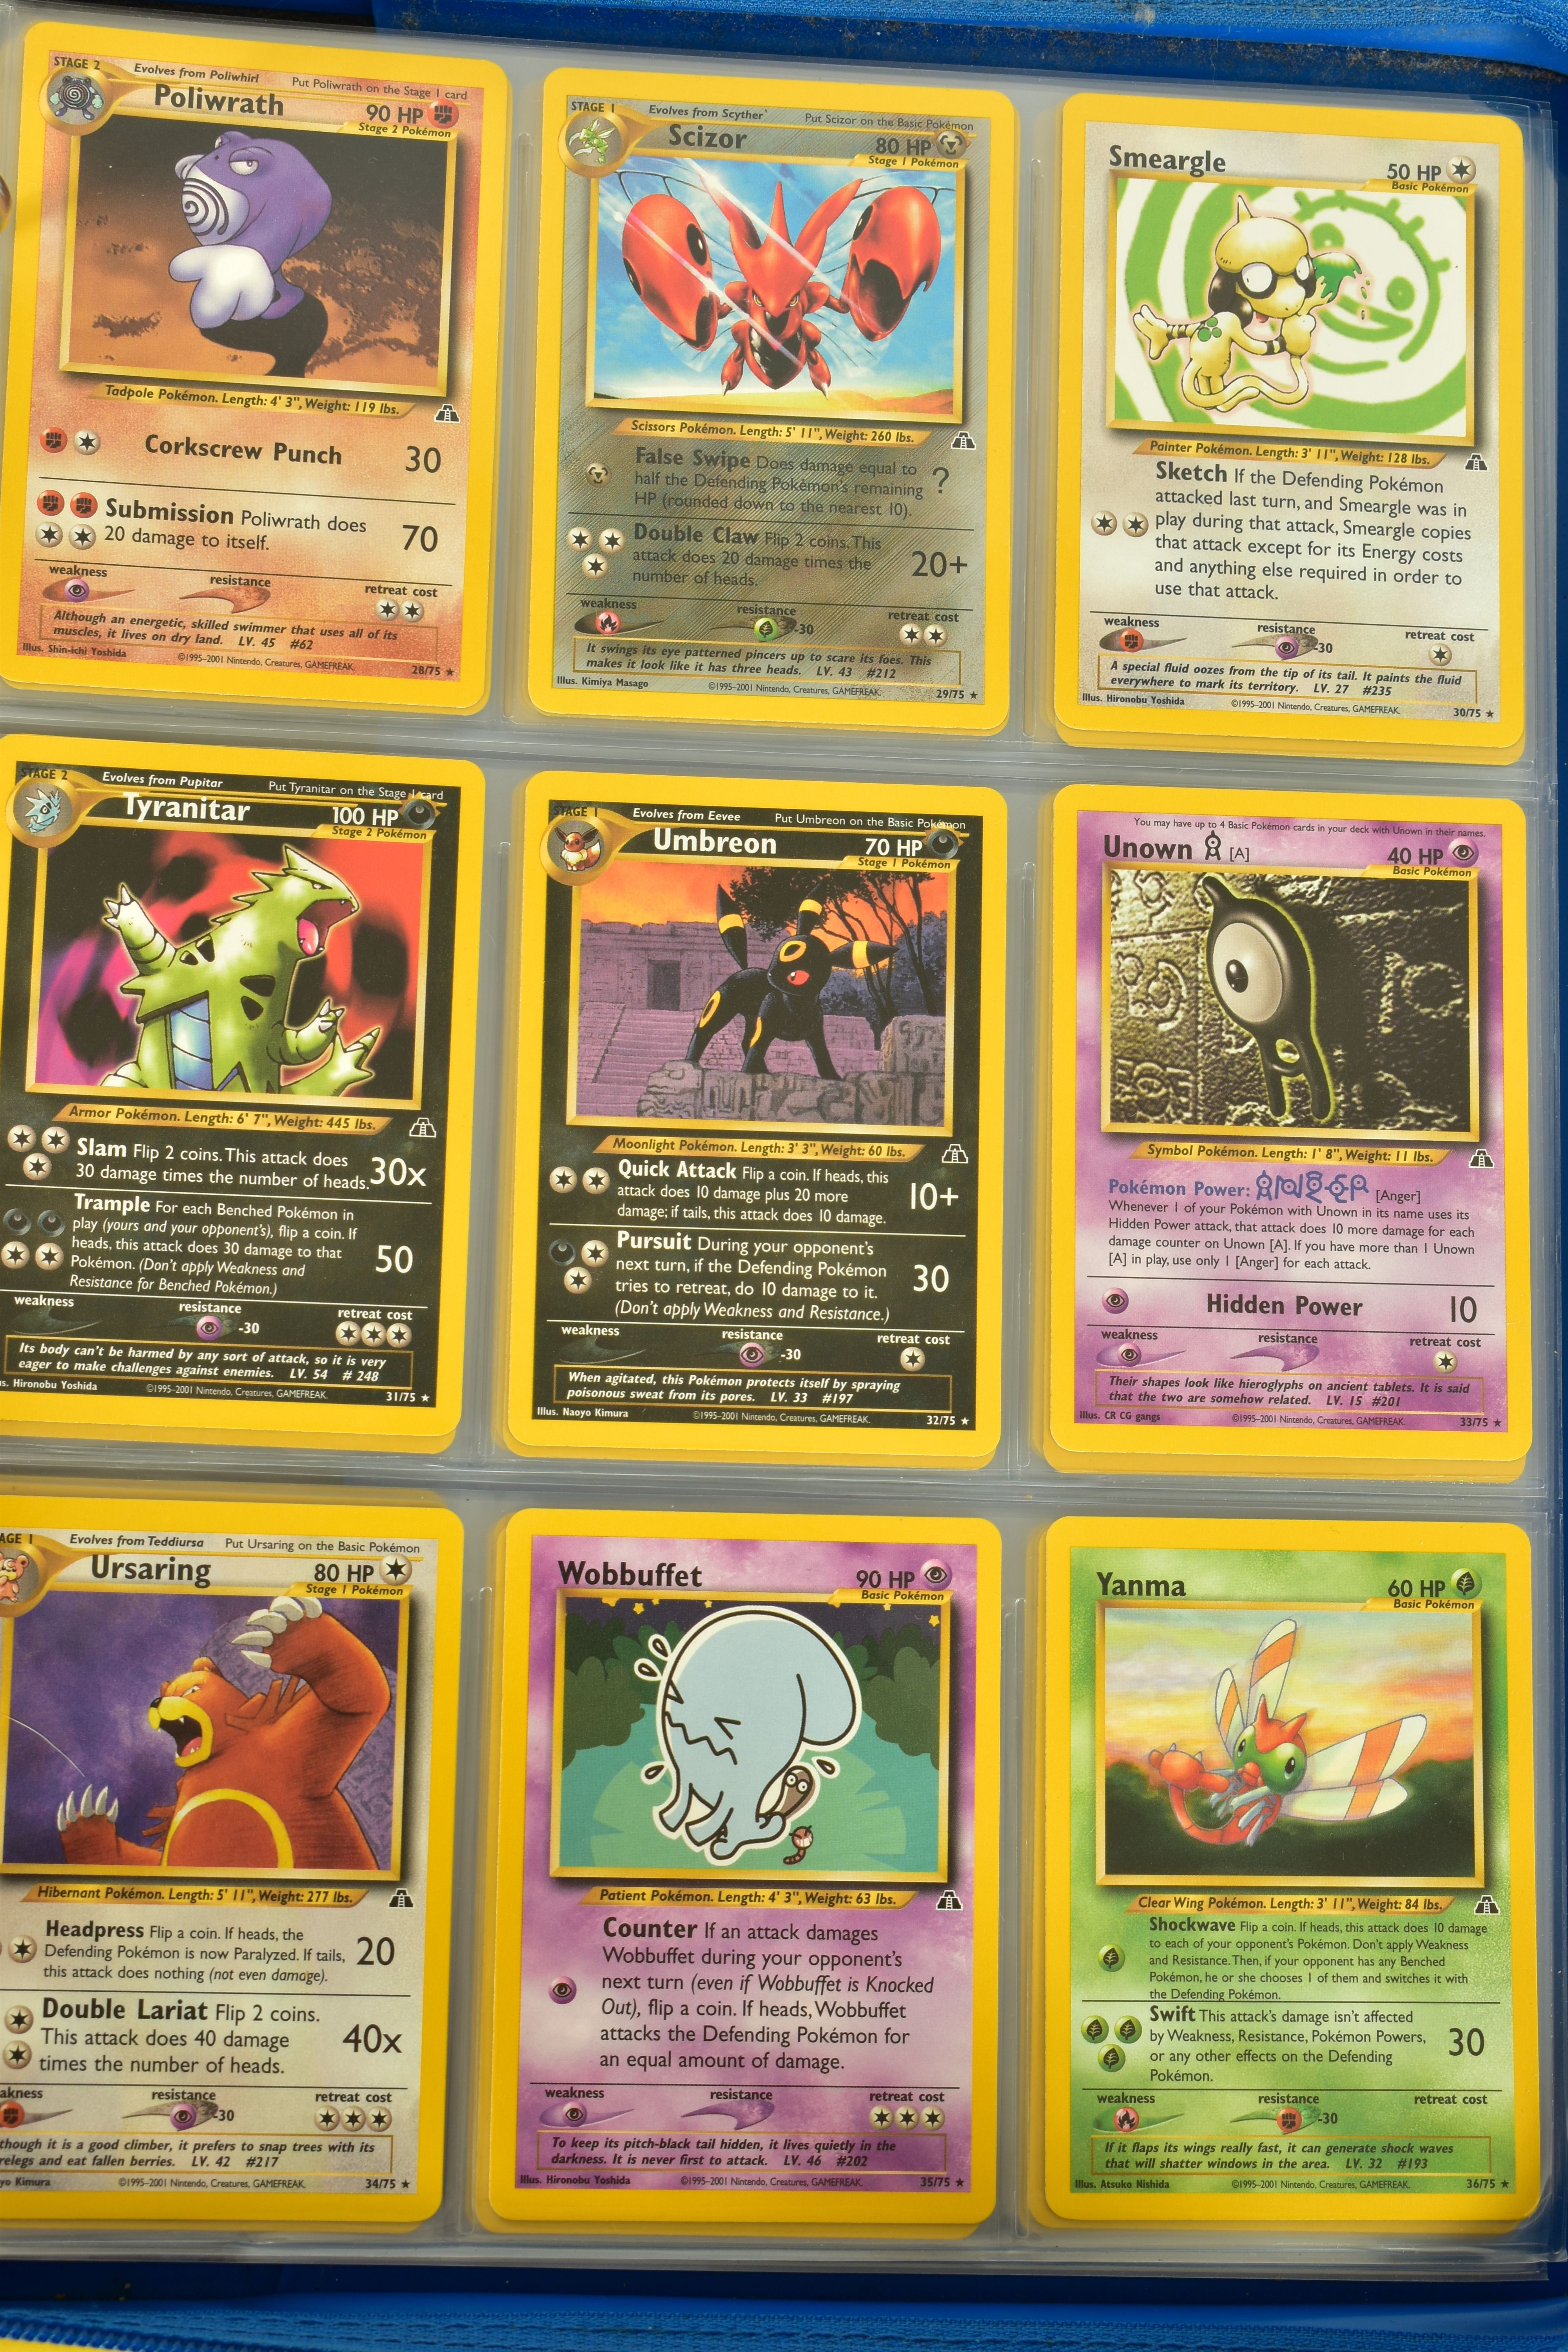 THE COMPLETE POKEMON CARD NEO GENESIS AND NEO DISCOVERY SETS, containing many first edition cards. - Image 27 of 32